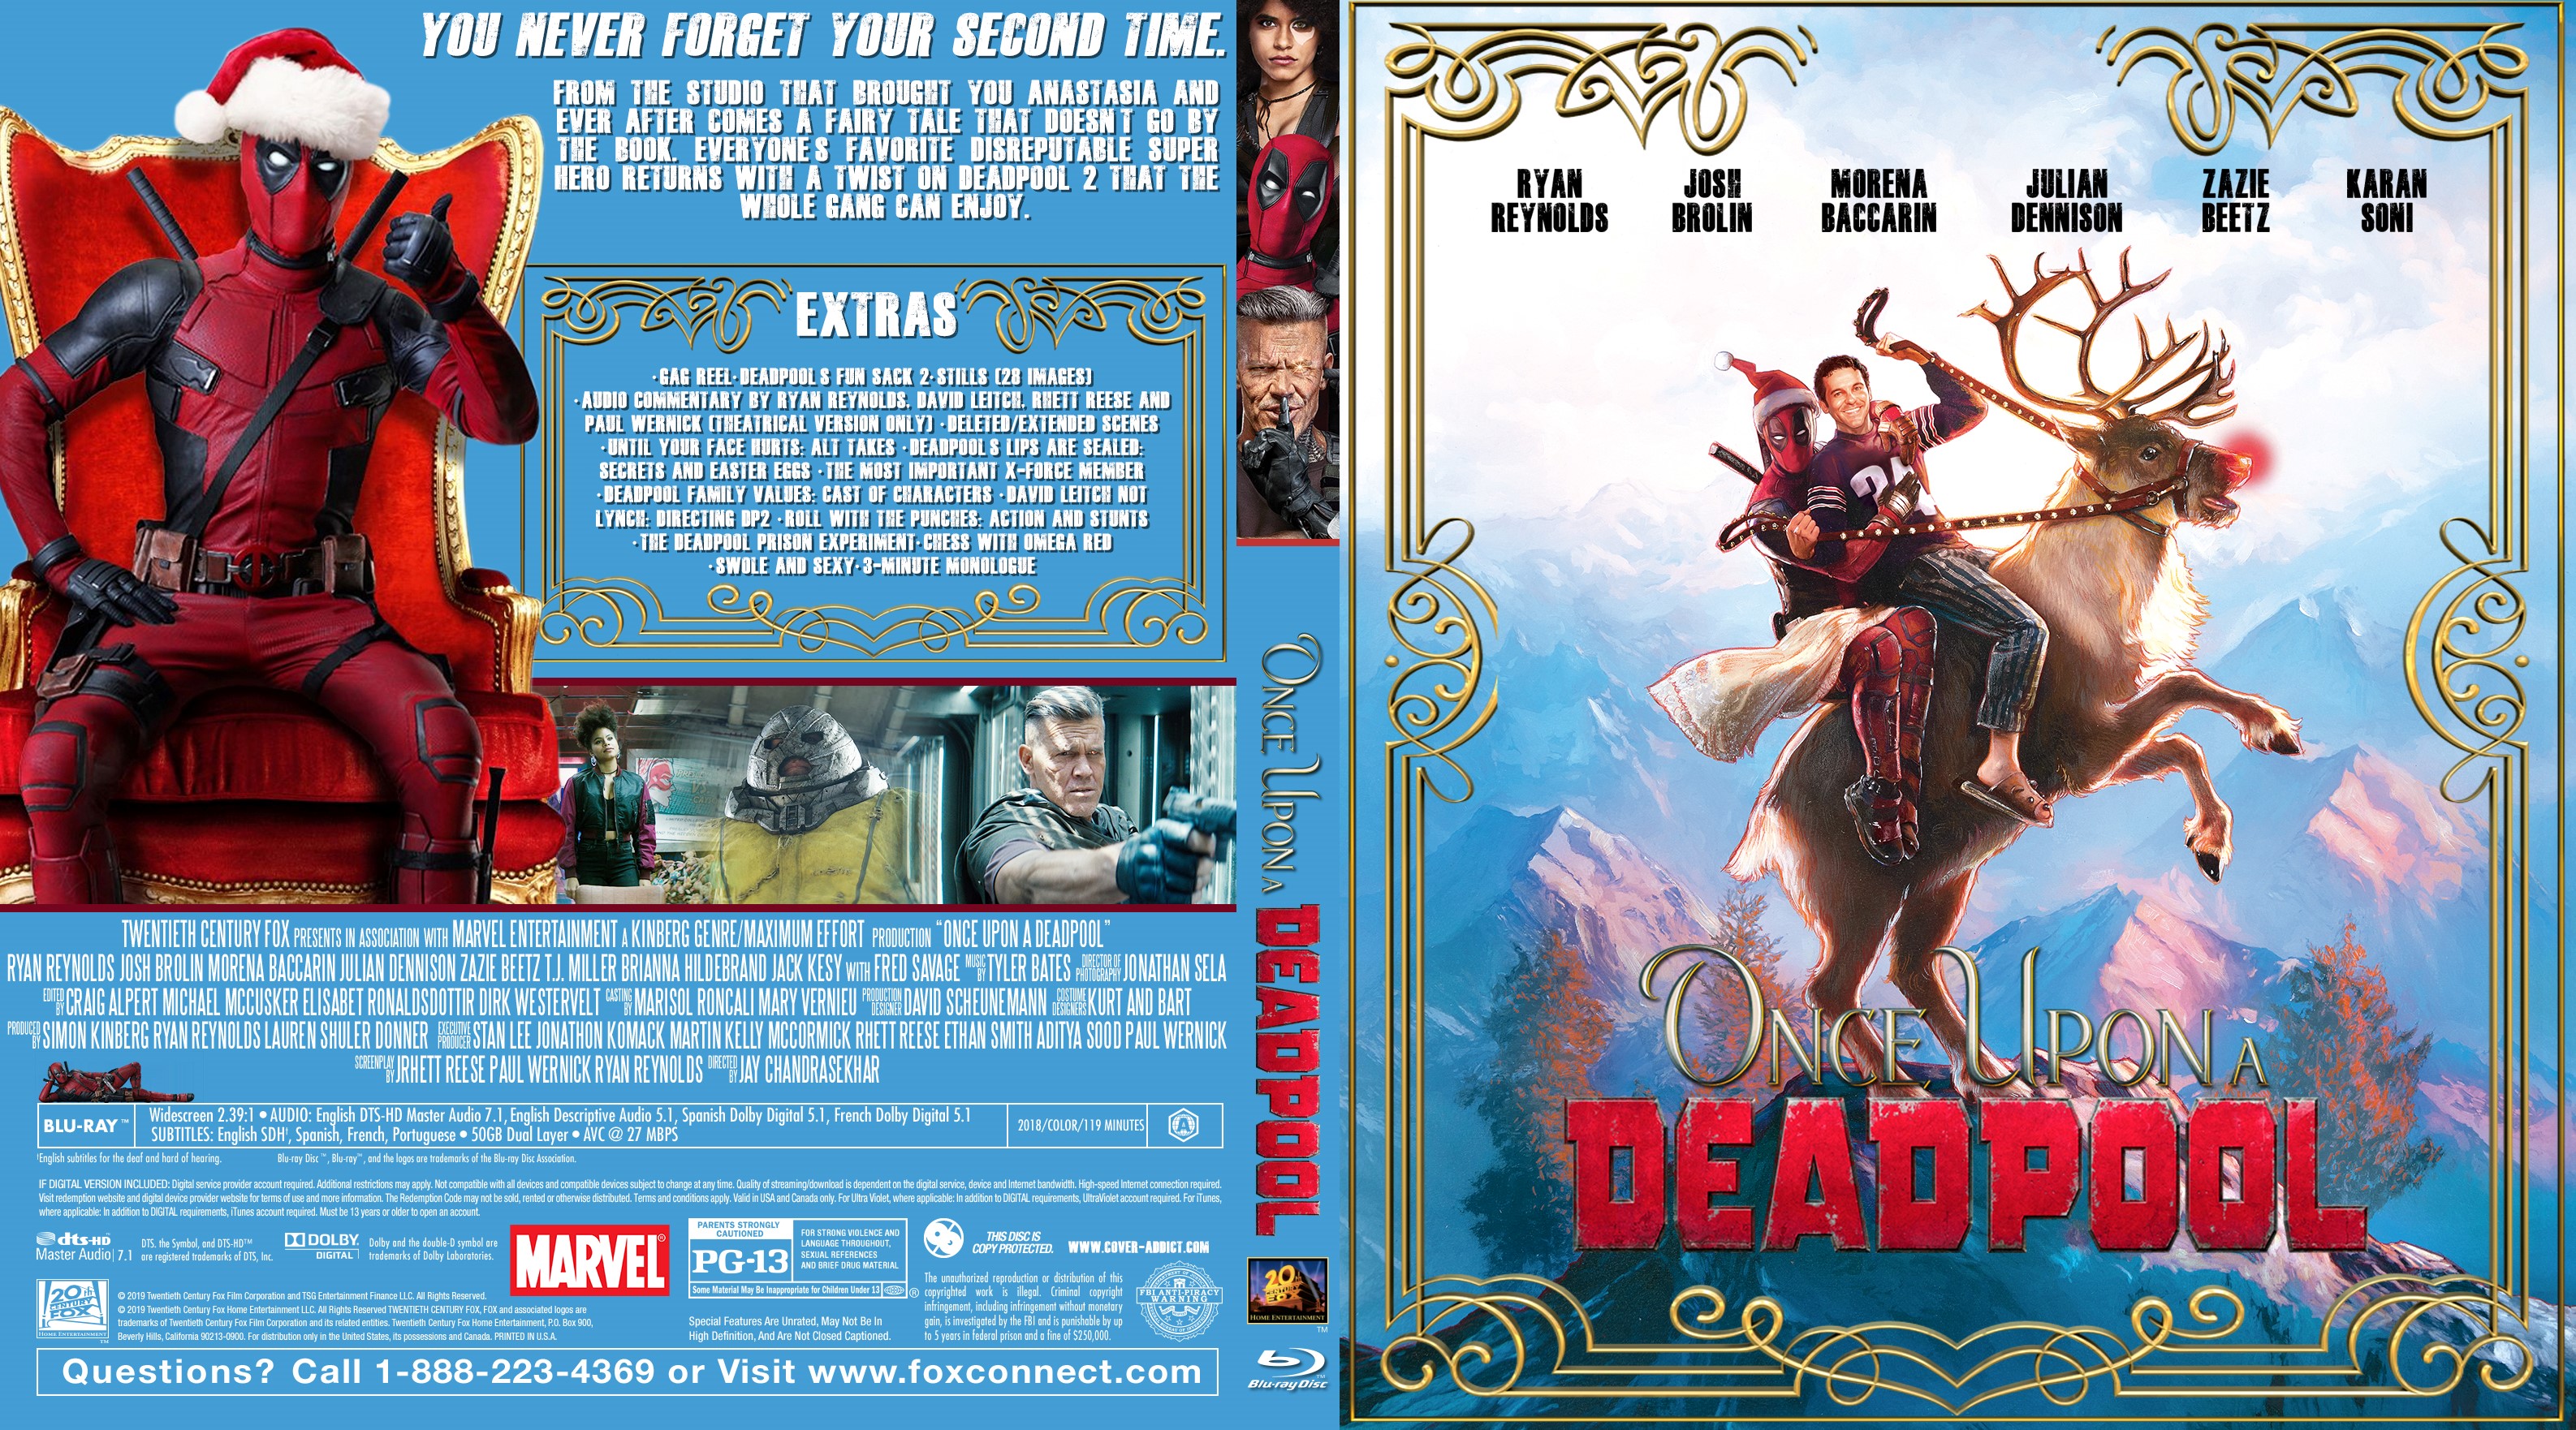 Once Upon A Deadpool Bluray Cover Cover Addict Free Dvd